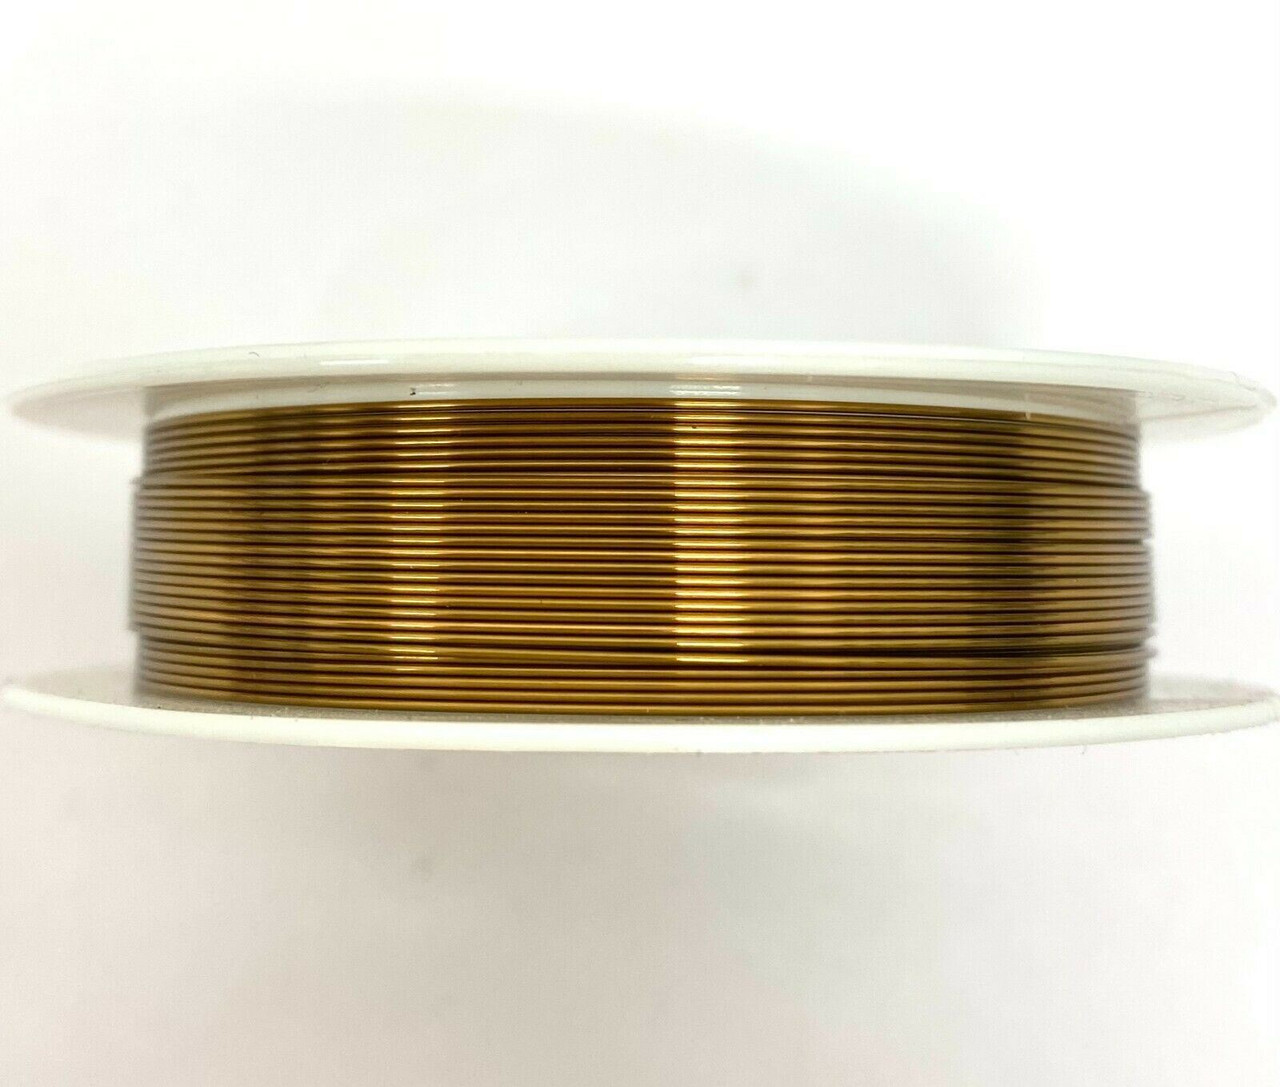 Roll of Copper Wire, 0.3mm thickness, GOLDEN BROWN colour, approx 26m length